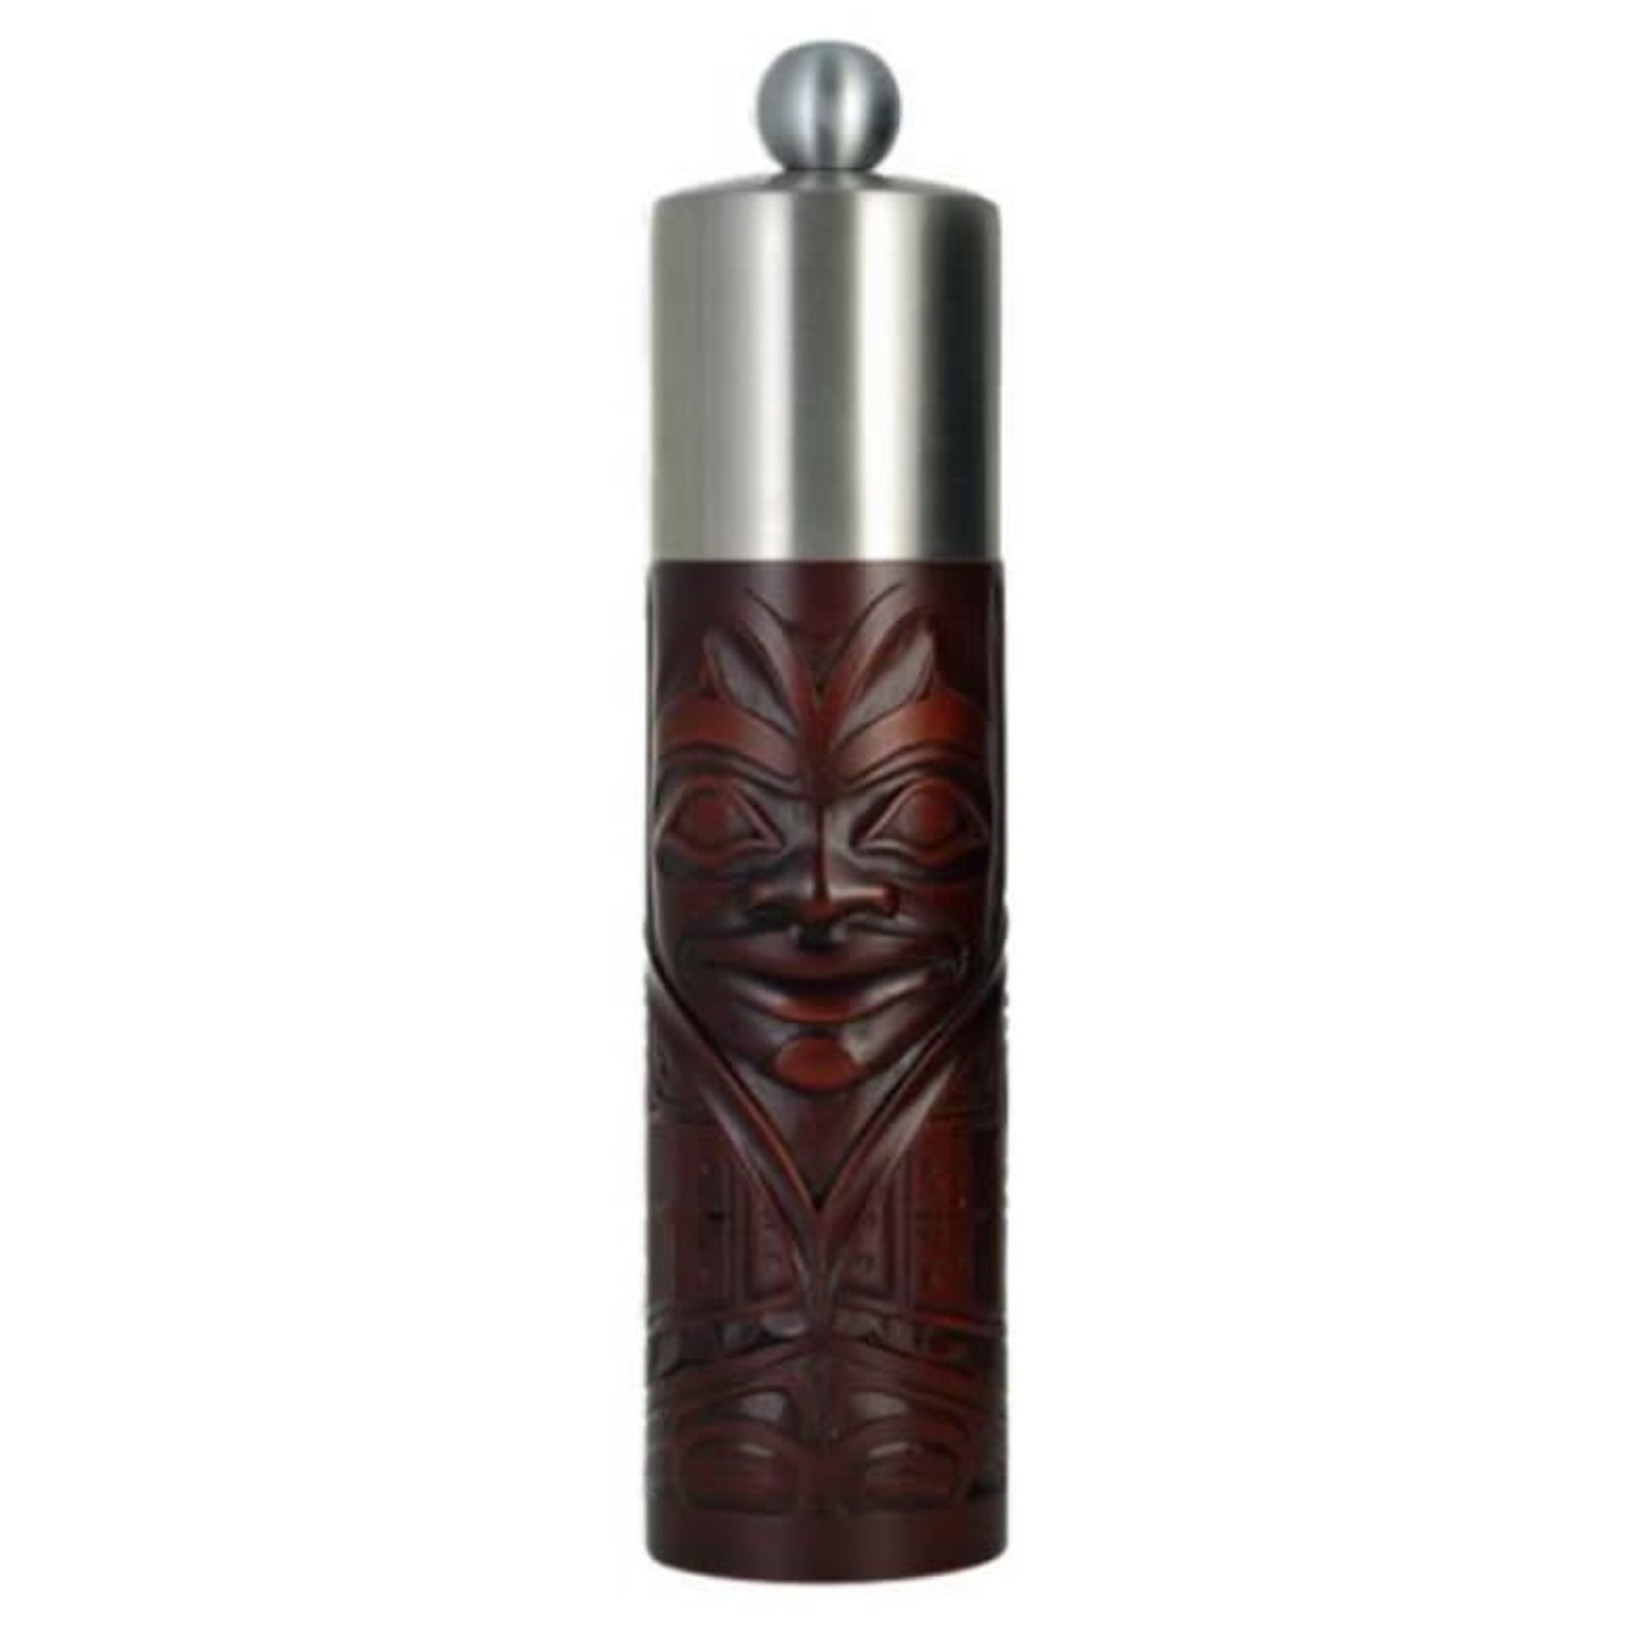 PANABO MARK GARFIELD Chief Recycled Glass Grinder - Rosewood DNR